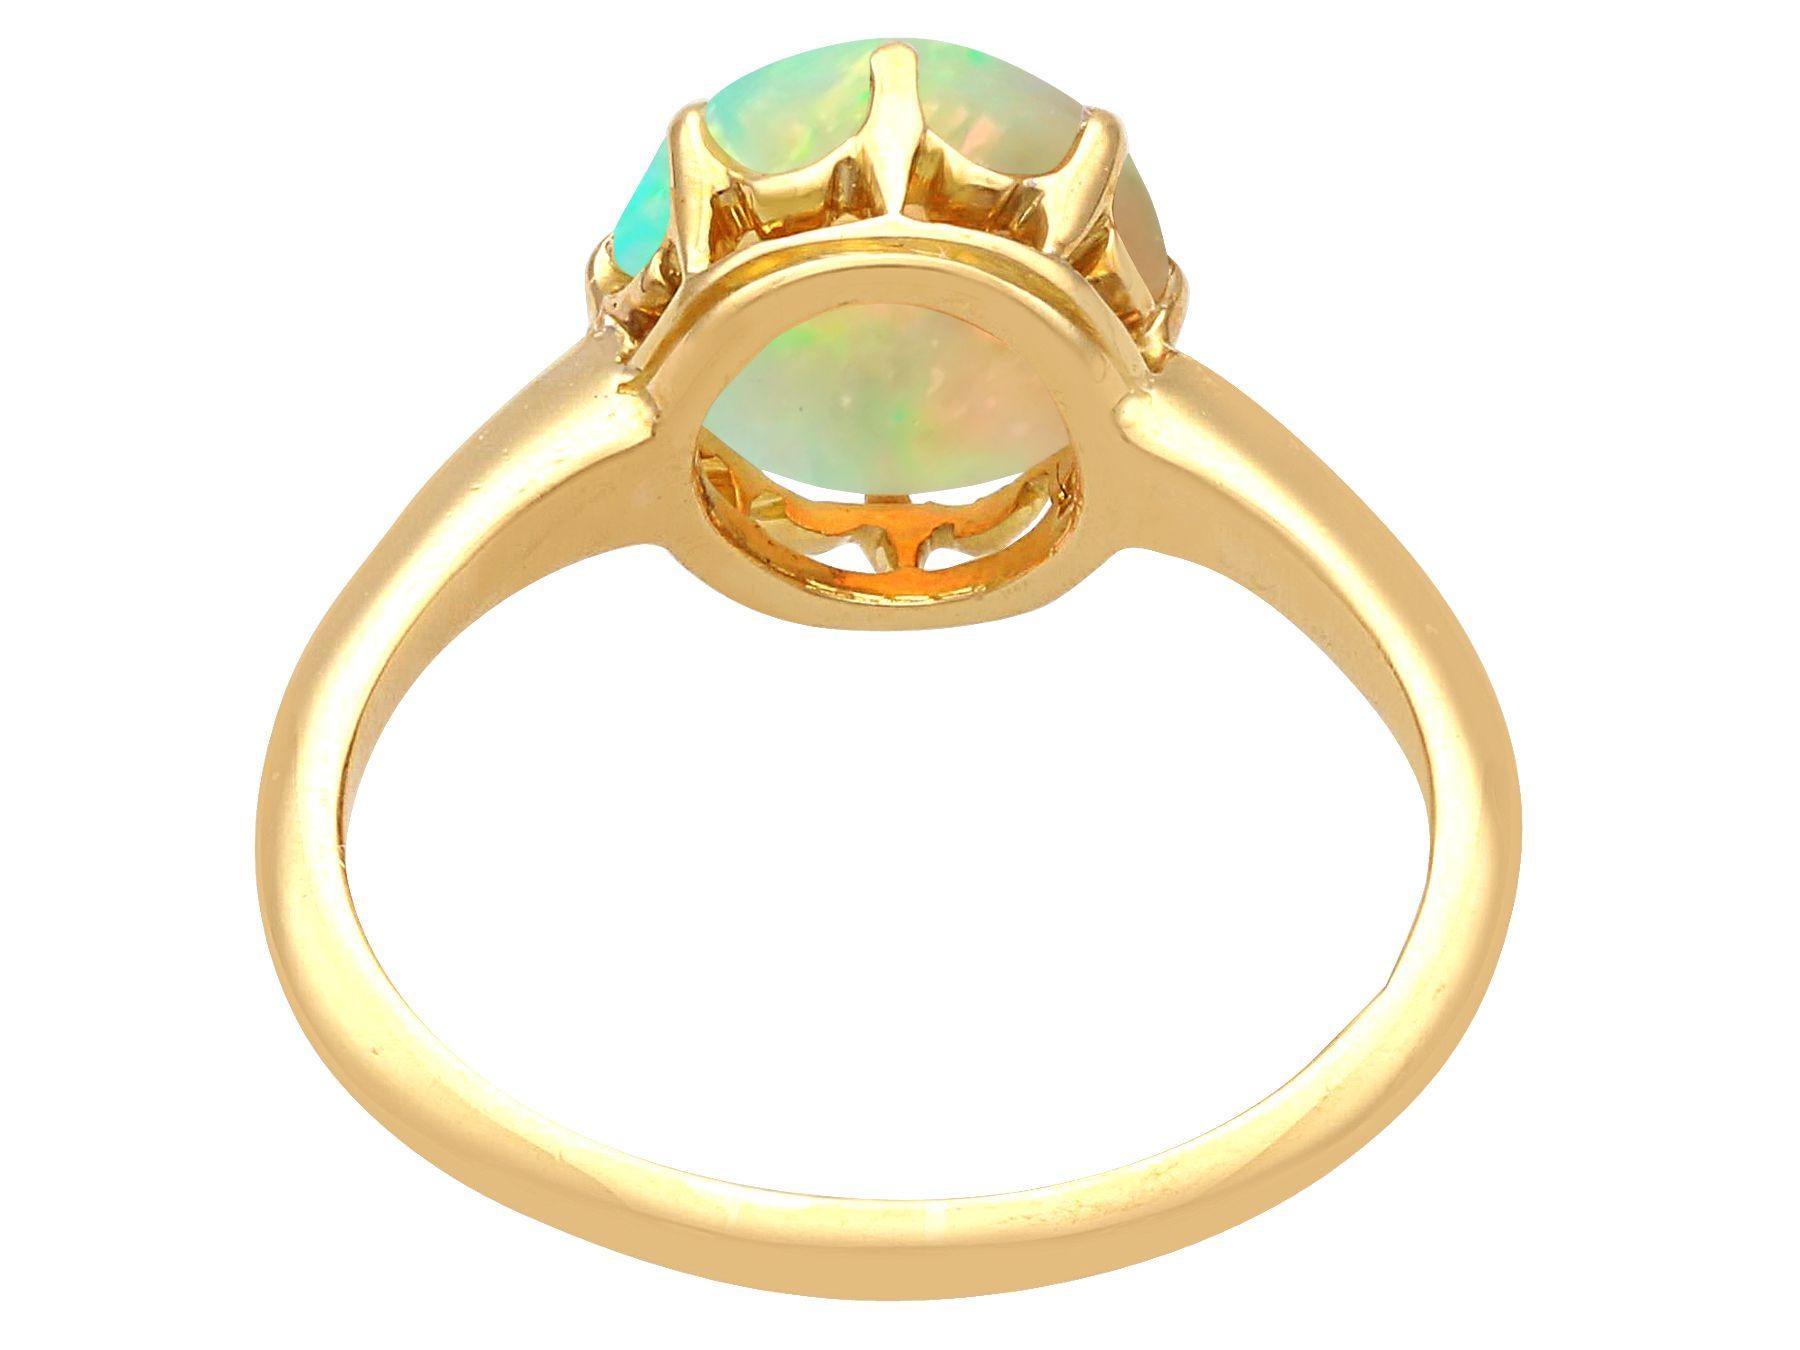 Antique 1.12 Carat Opal and Yellow Gold Solitaire Ring In Excellent Condition For Sale In Jesmond, Newcastle Upon Tyne